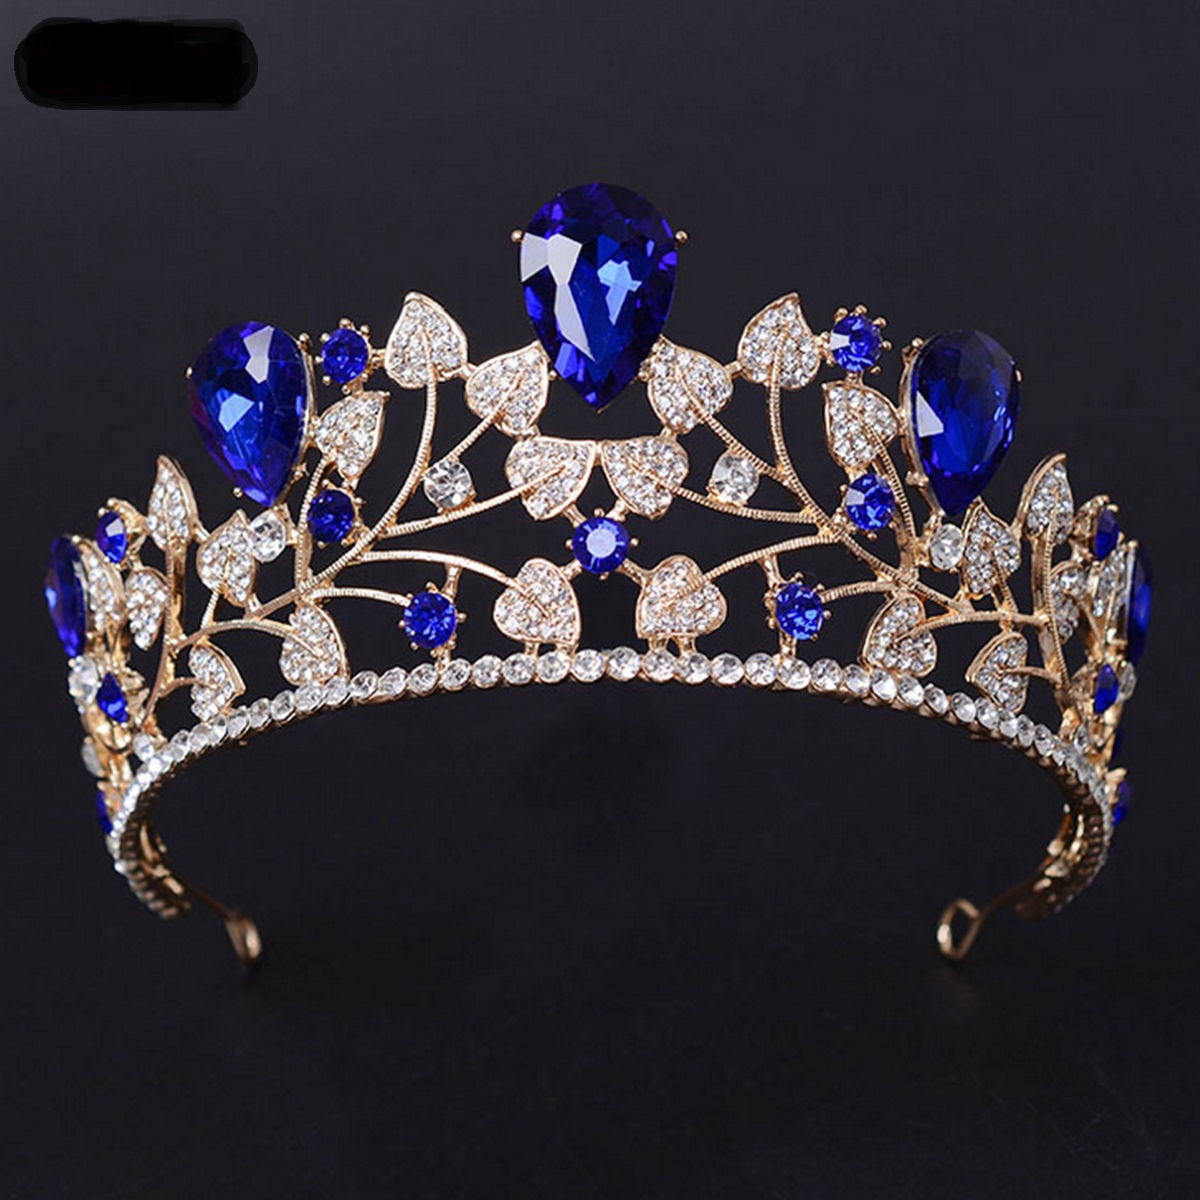 New Gold & Blue Crystal Tiara (Code T22) | Dance Costume Supplies